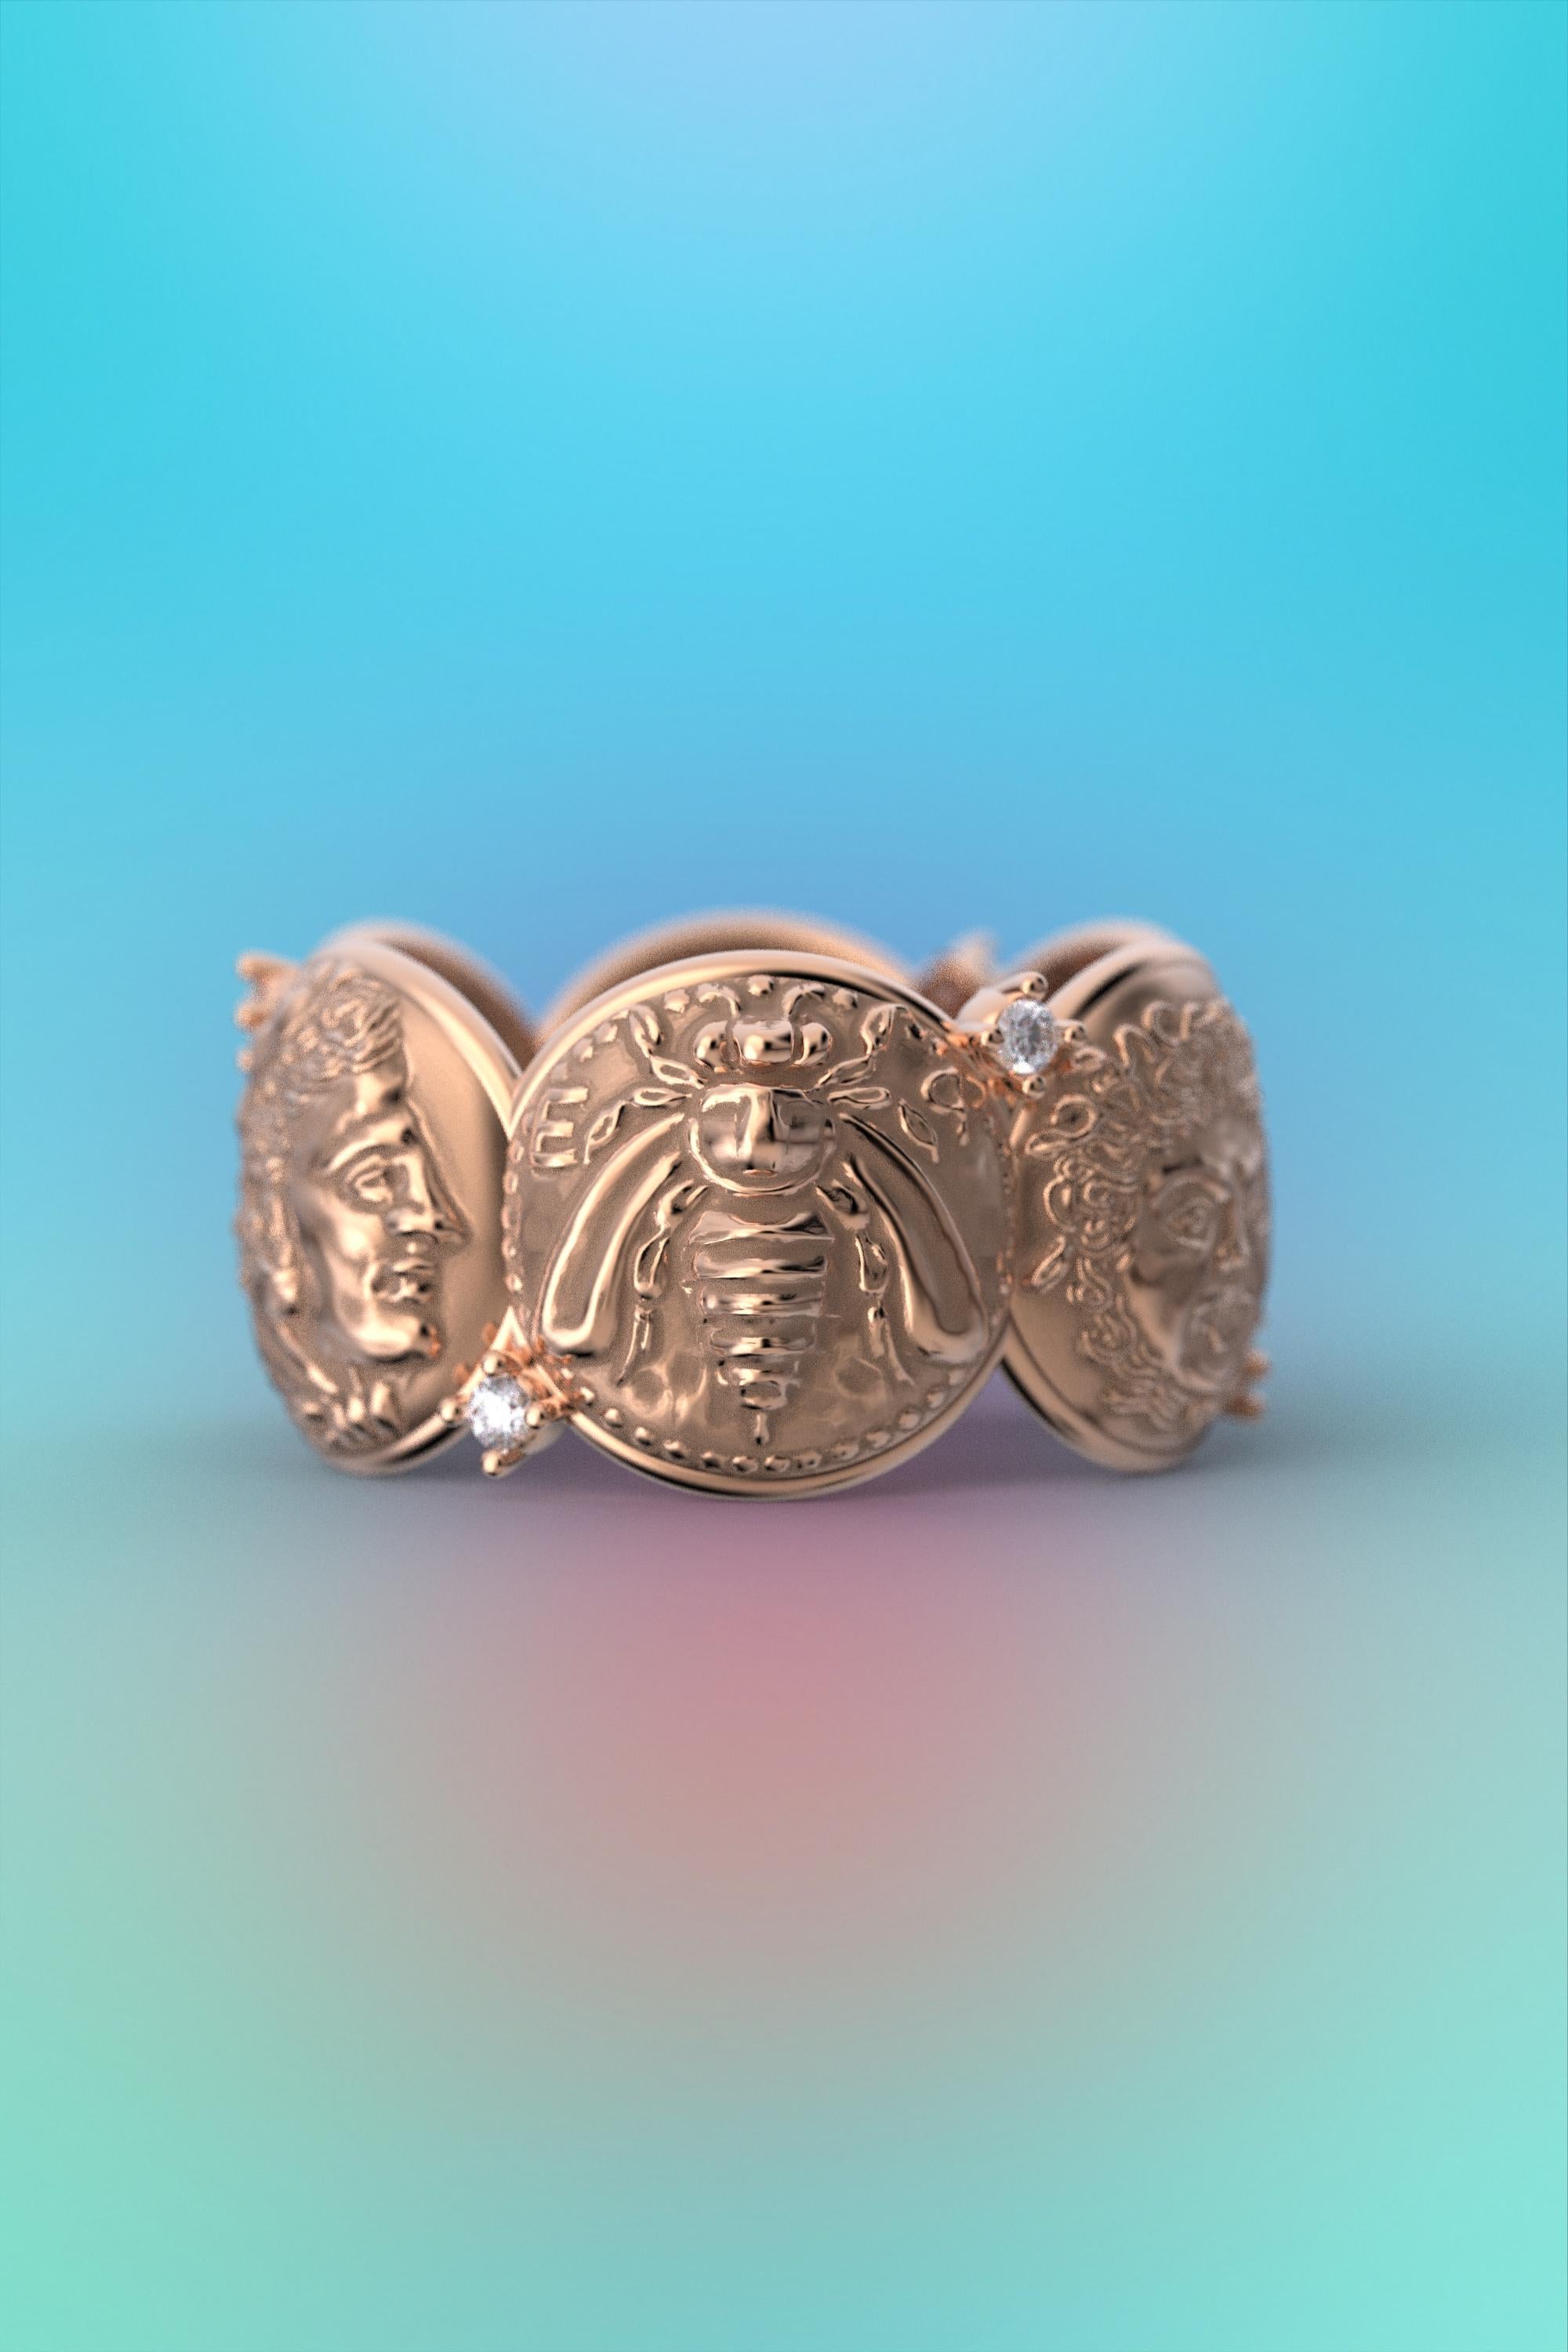 For Sale:  14k Antique Style Gold Ring with Antique Coin Reproductions and Natural Diamonds 6